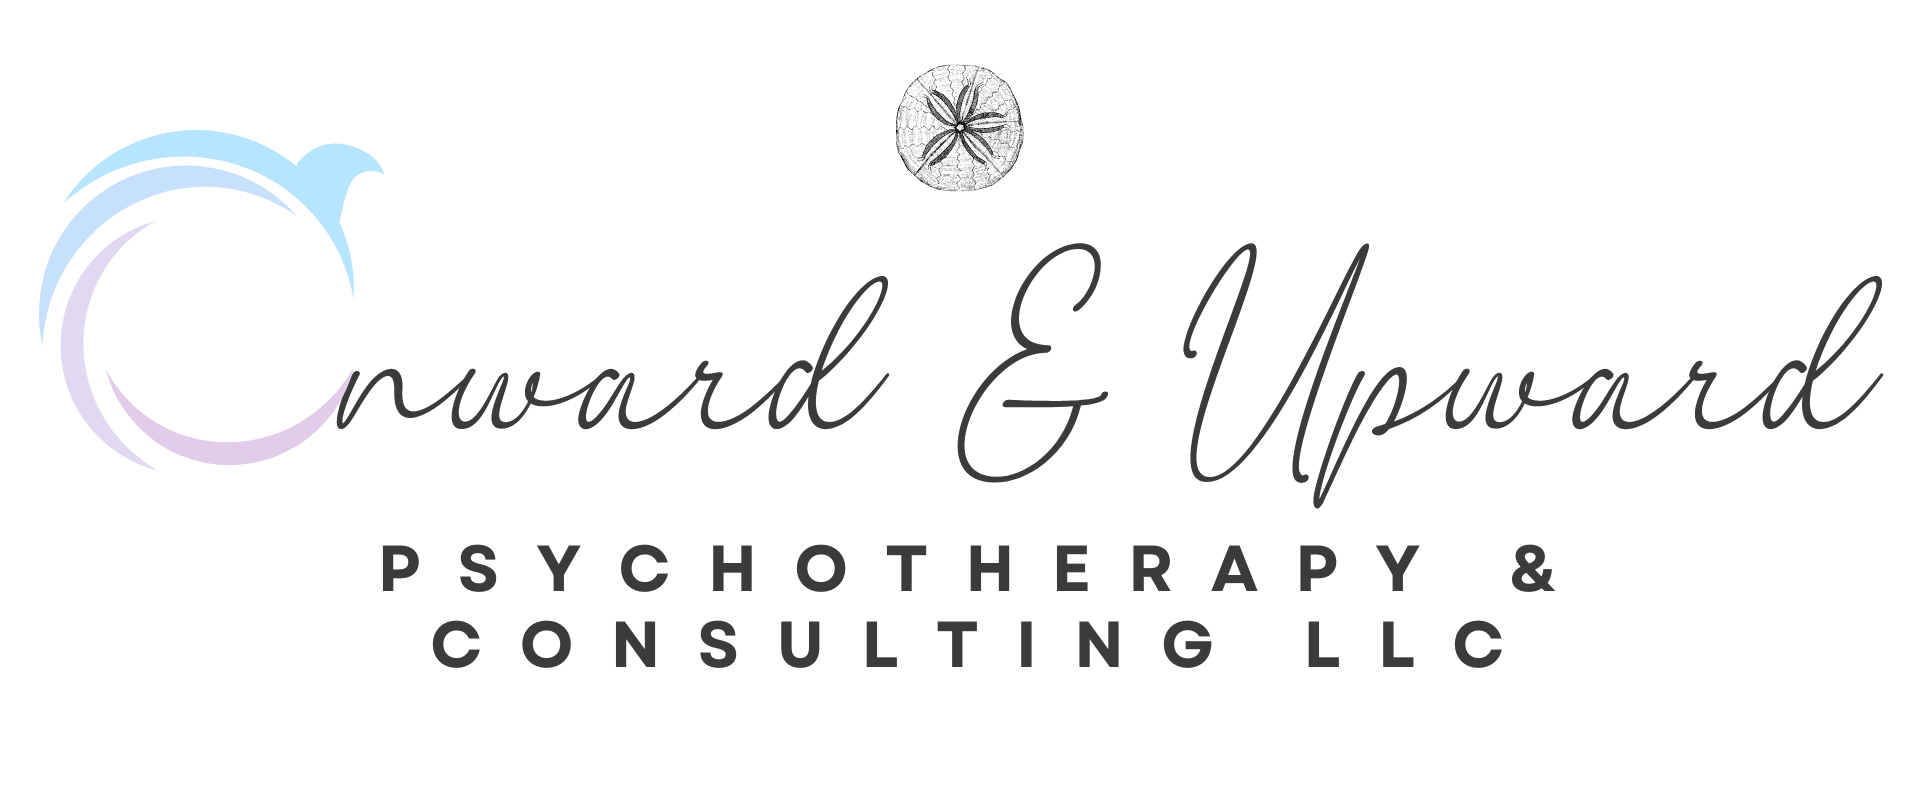 Visit our Therapy & Consulting Website: Onward and Upward Psychotherapy & Consulting Services, LLC thumbnail